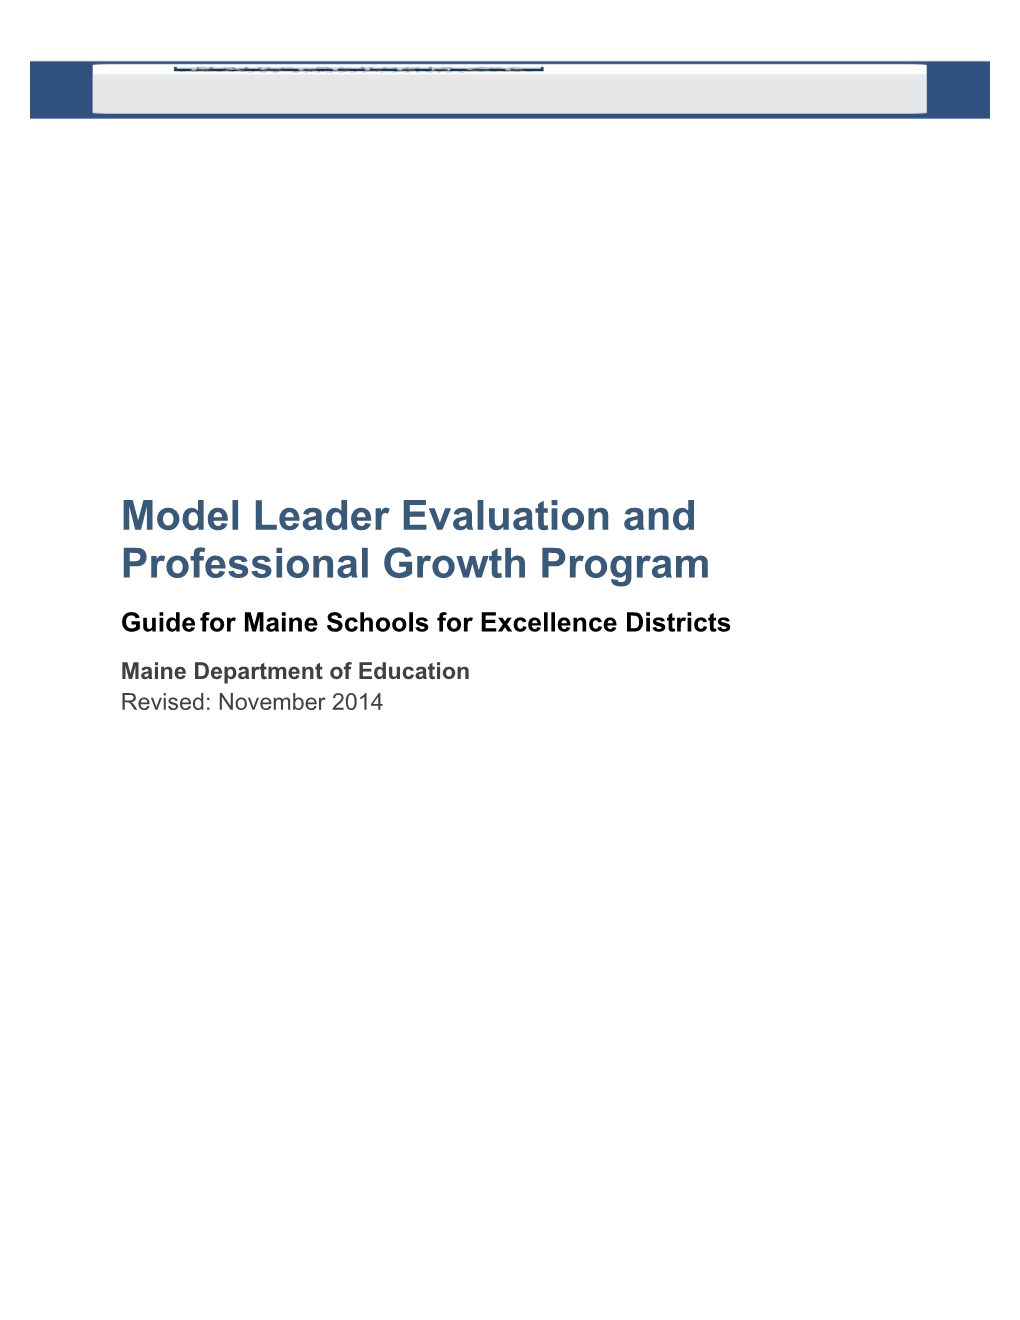 Model Leader Evaluation and Professional Growth Program